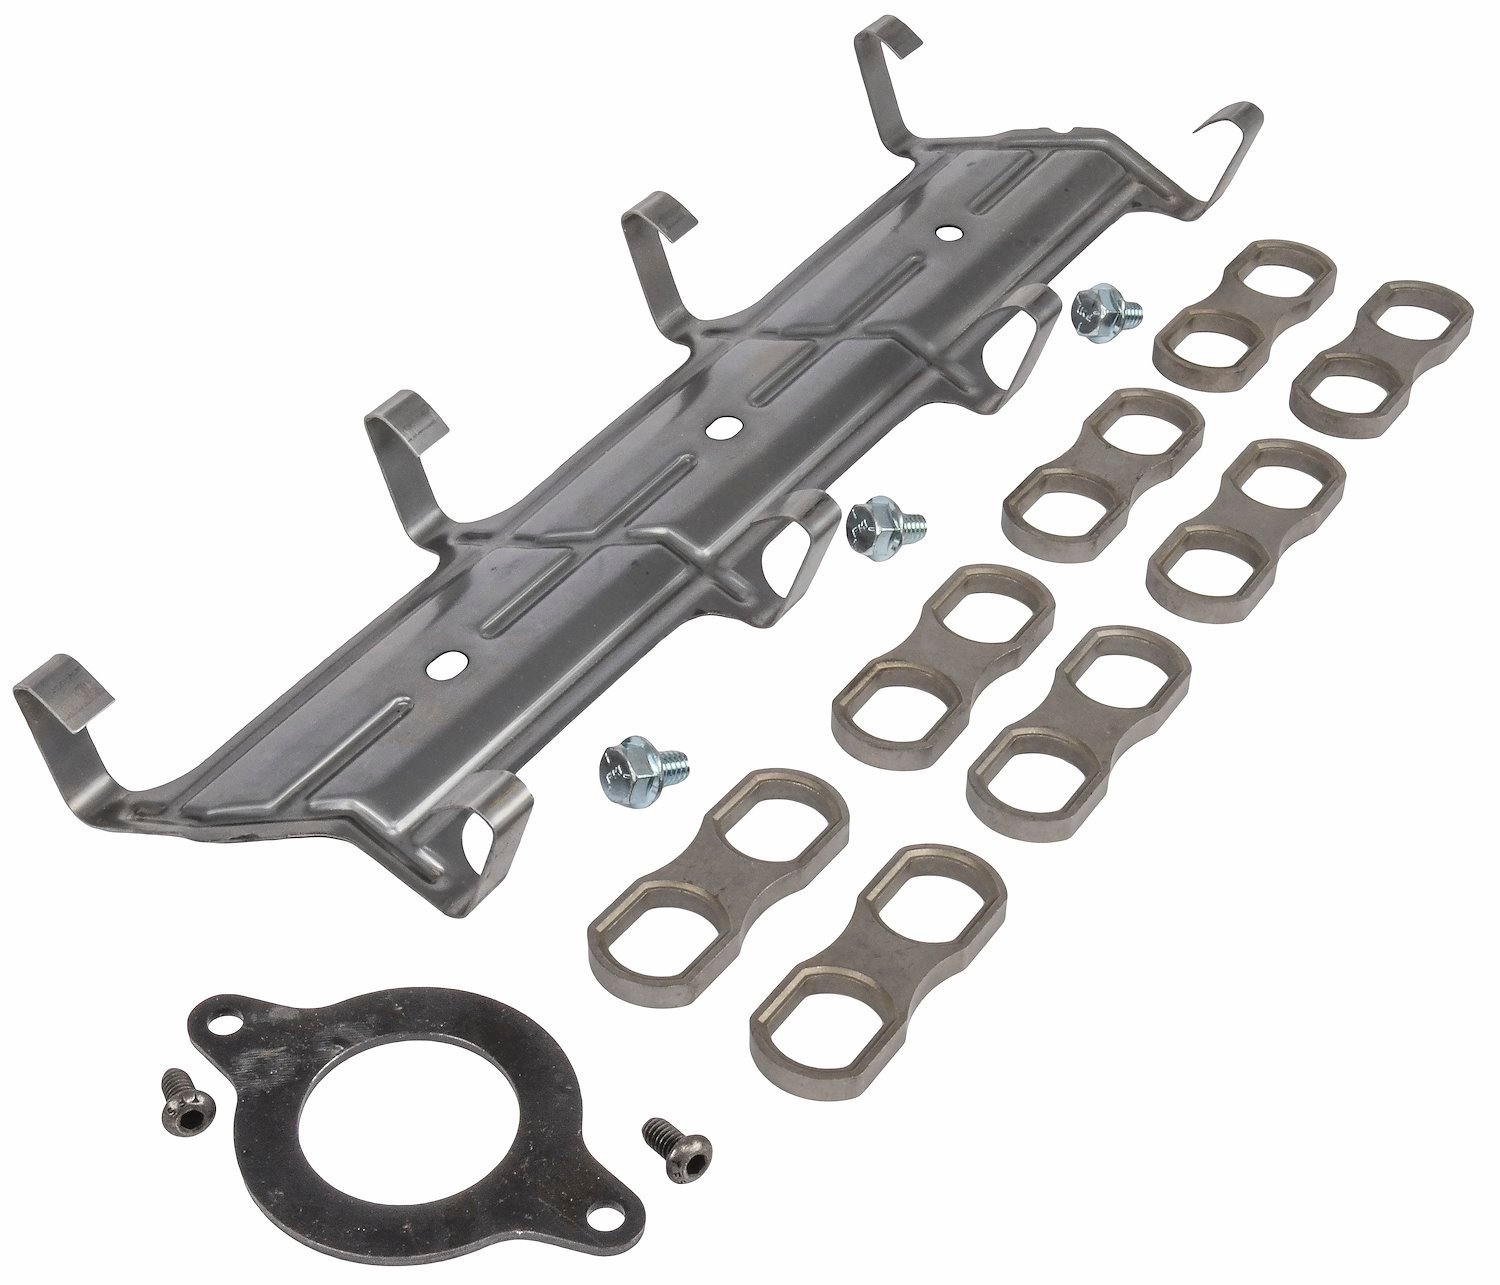 Roller Lifter Retainer Kit for 1991-2002 Small Block